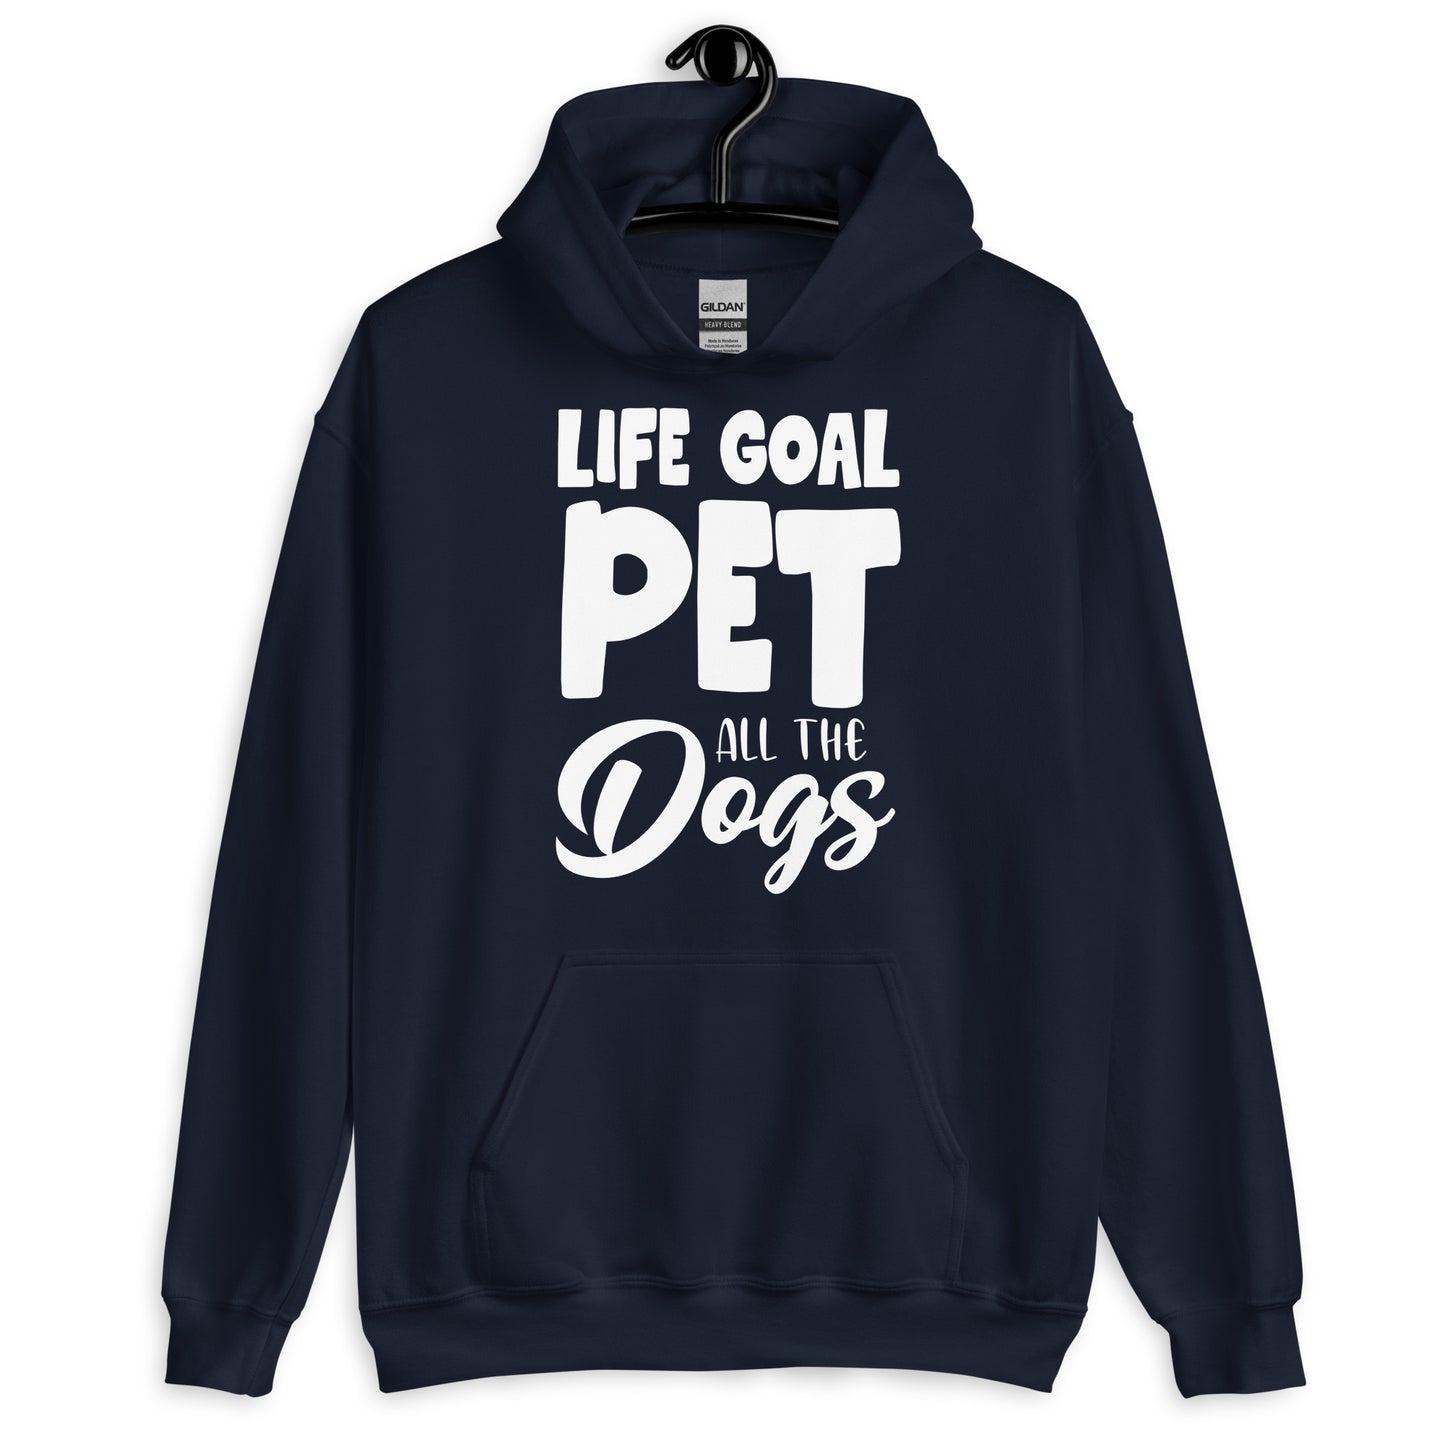 Life Goal Pet all The Dogs Hoodie